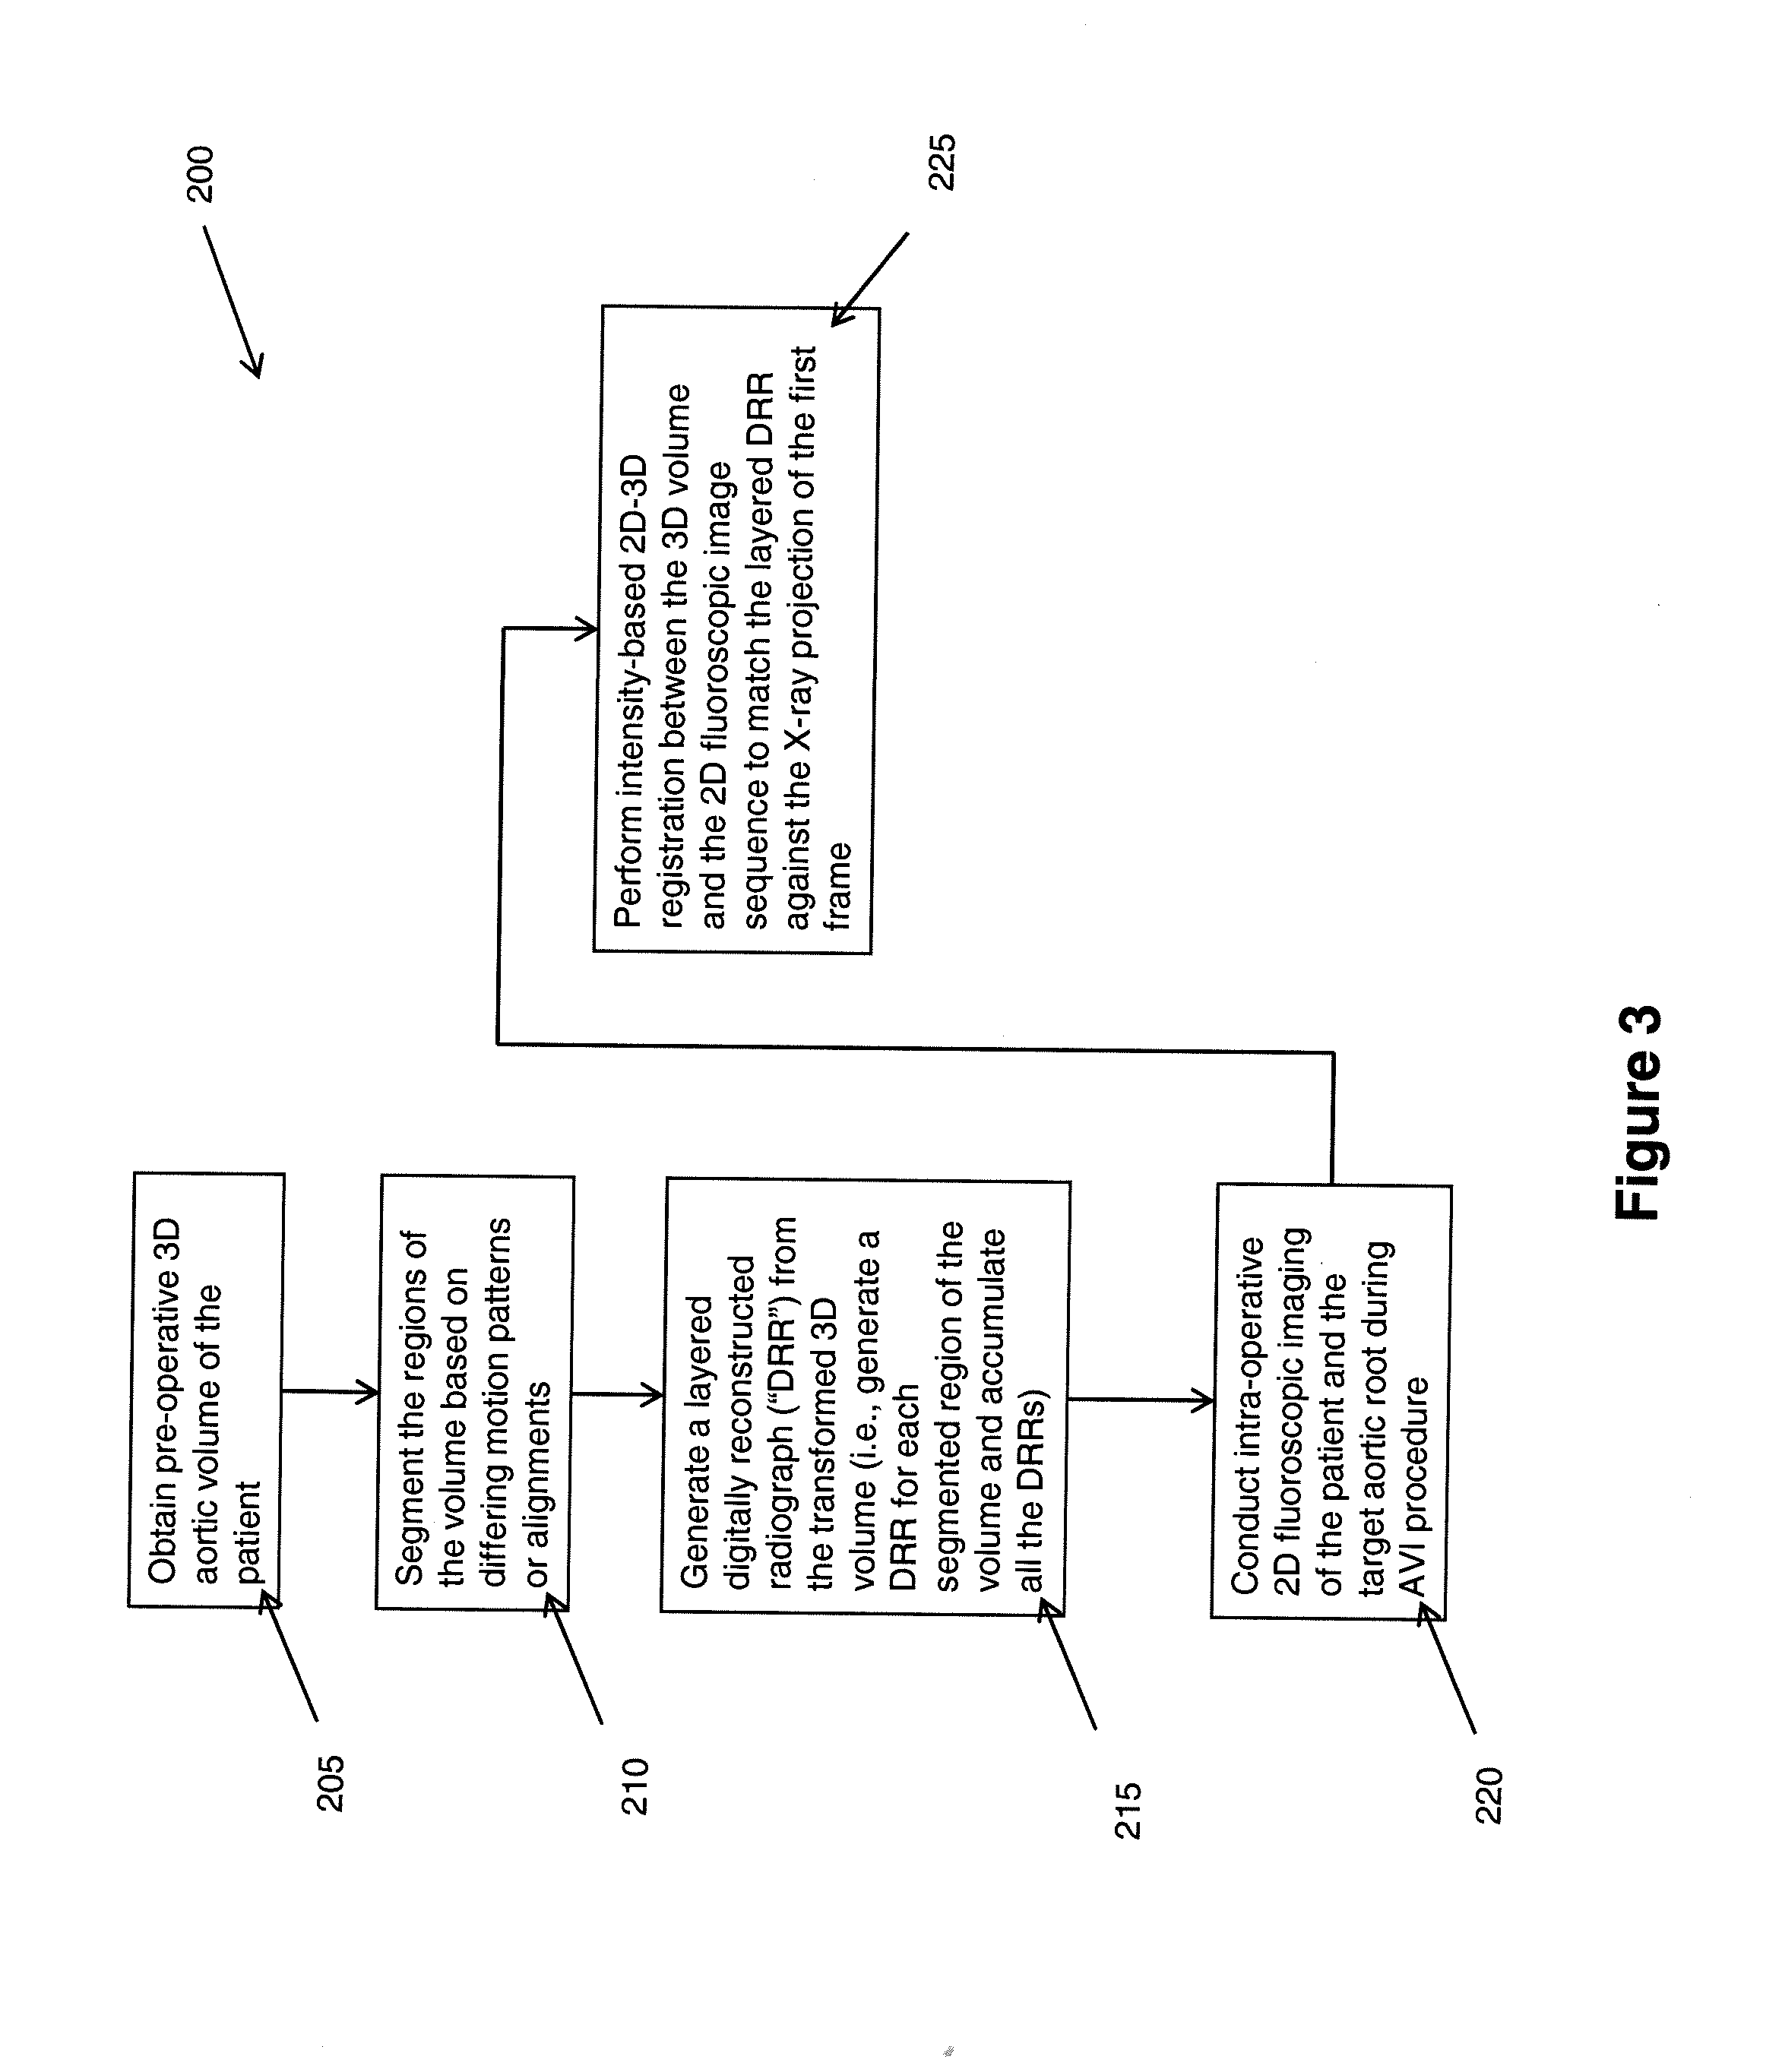 Method of motion compensation for trans-catheter aortic valve implantation